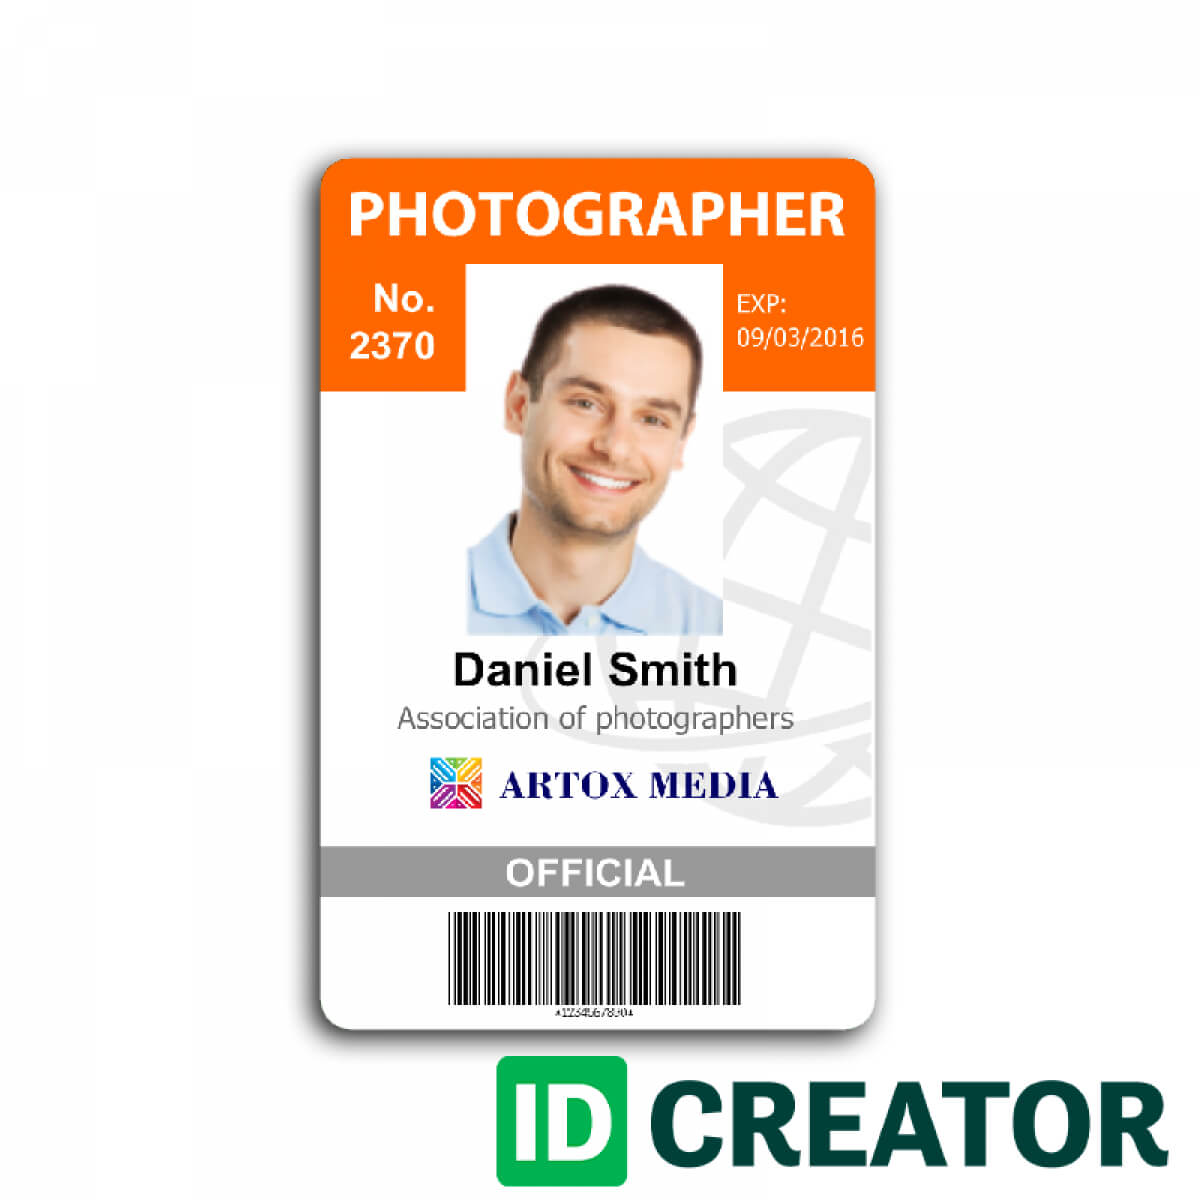 Employees Id Card Template Cards Format Lara Intended For Photographer Id Card Template